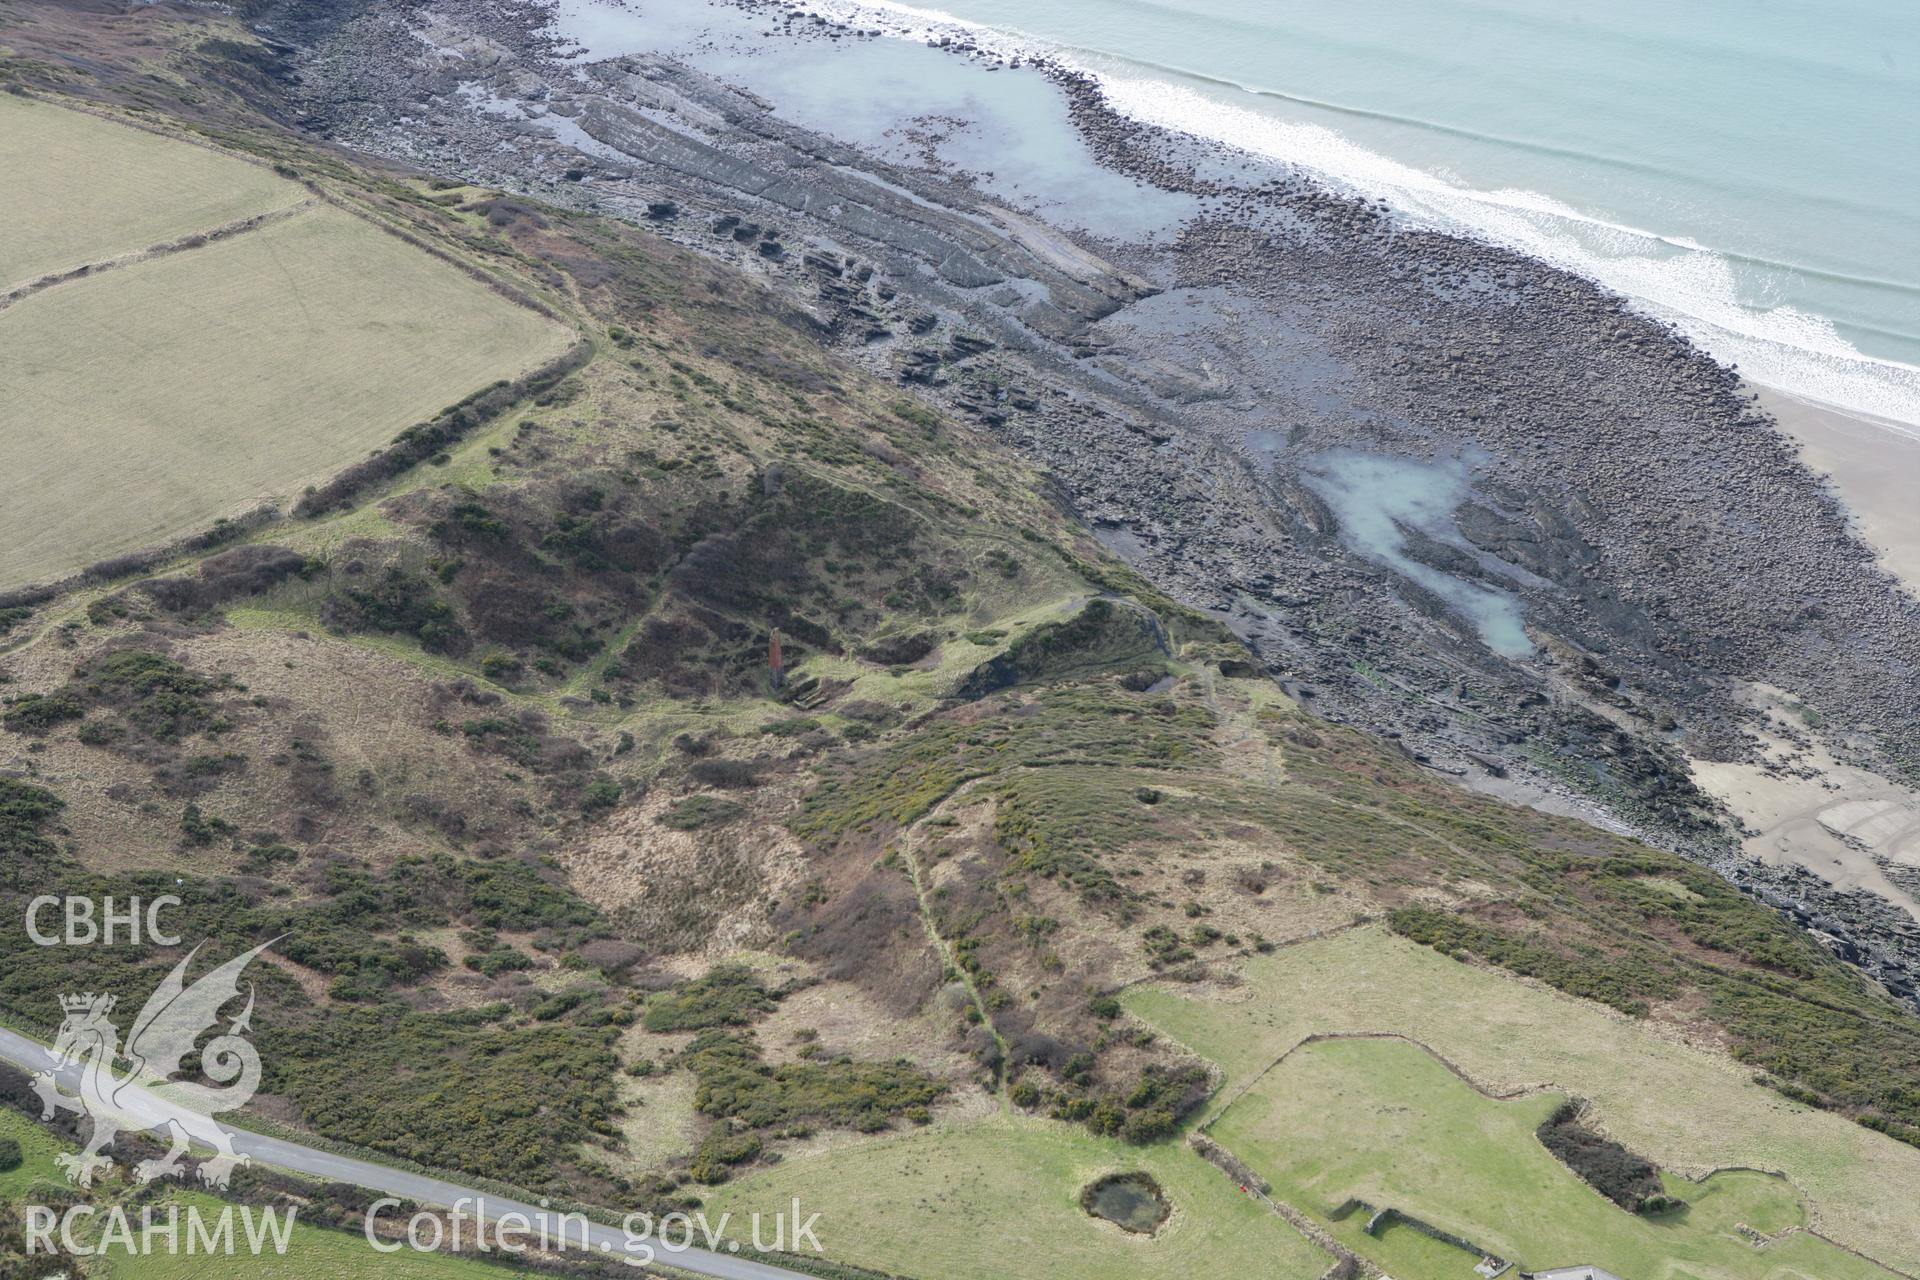 RCAHMW colour oblique aerial photograph of Trefran Cliff Colliery. Taken on 02 March 2010 by Toby Driver